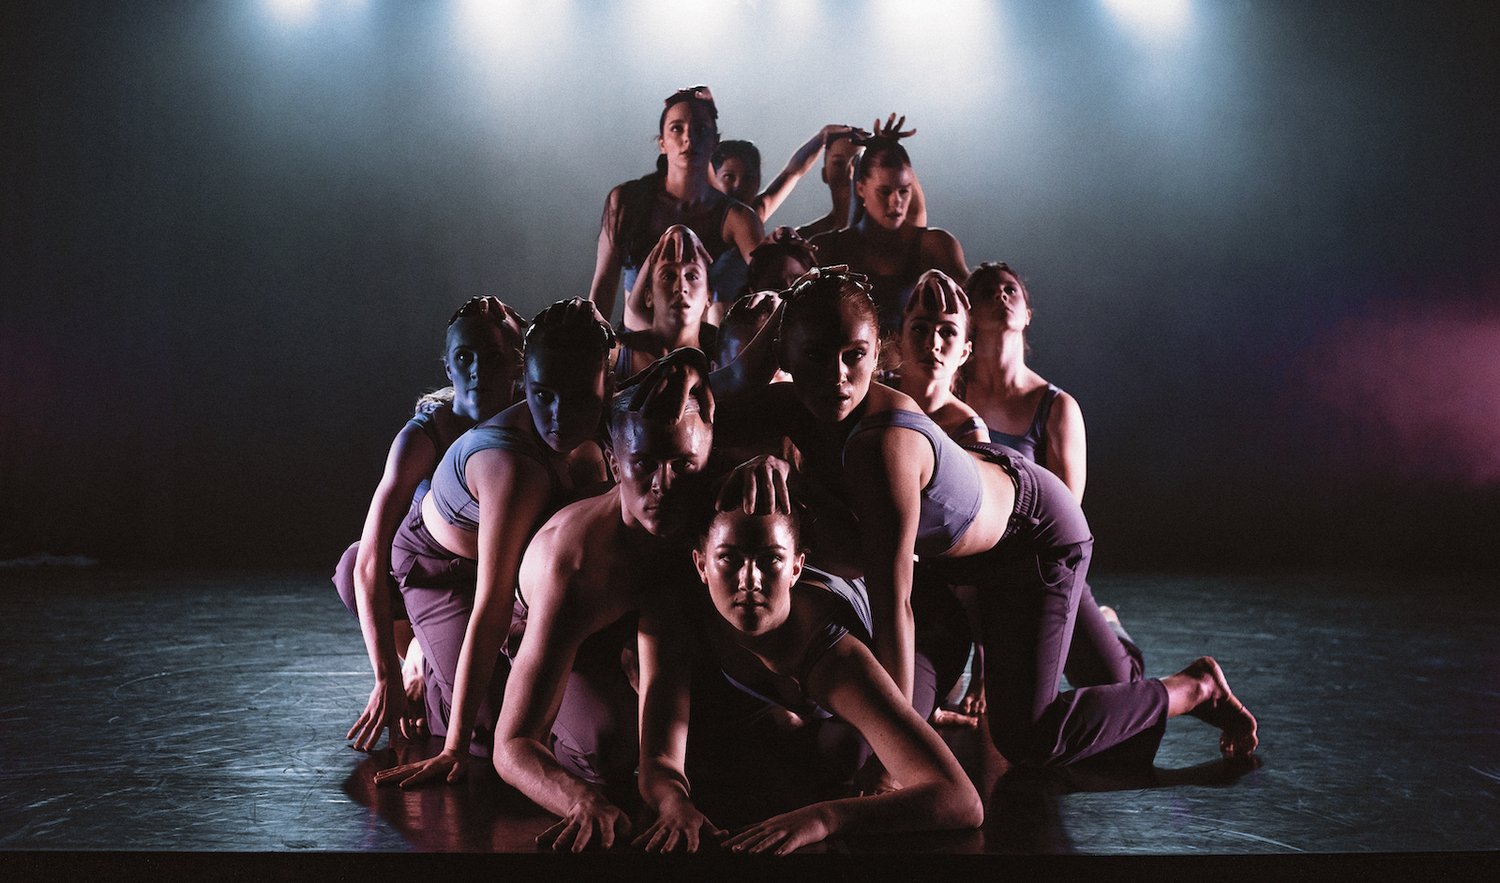 Distinguished Modern Dance Firm SCIMM introduces their Pre-Skilled Full-Time Coaching Course — A Dancer’s Life